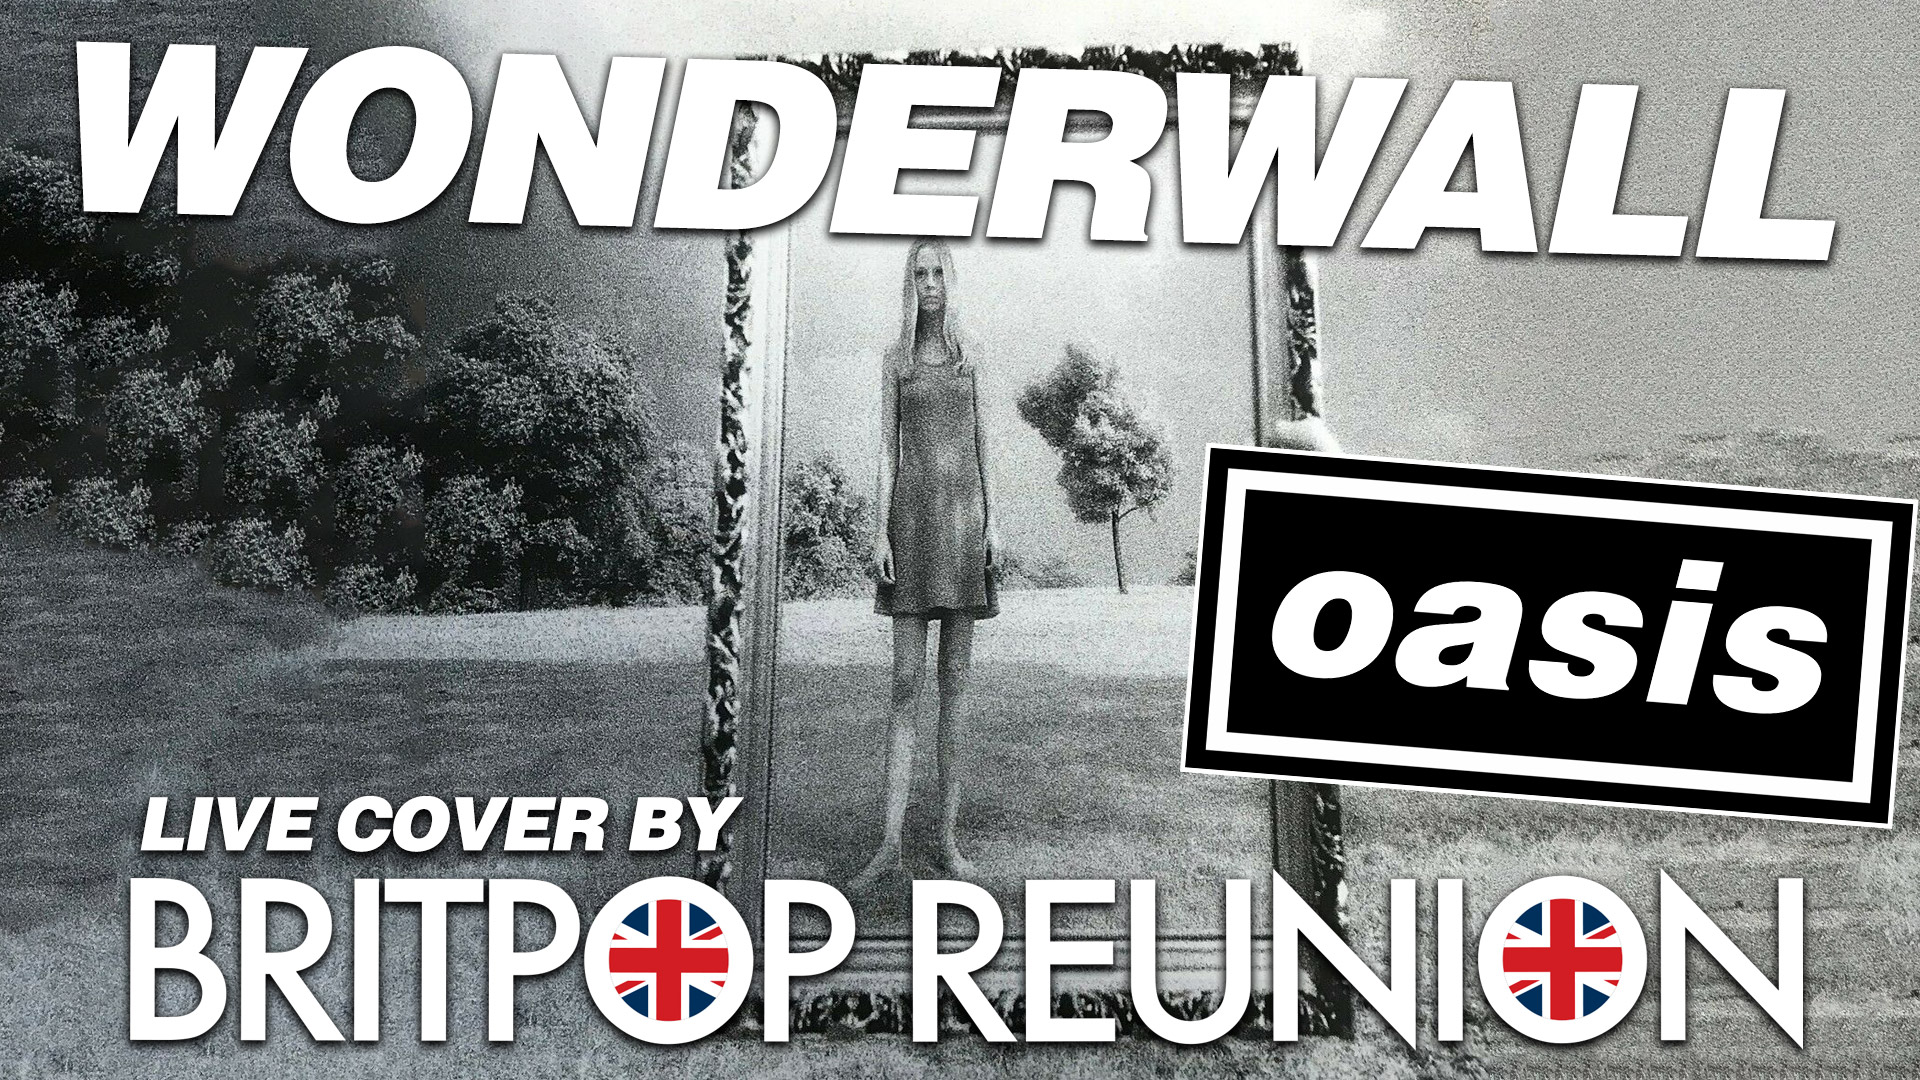 Wonderwall by Oasis Cover Version Live Brit Pop Cover Band